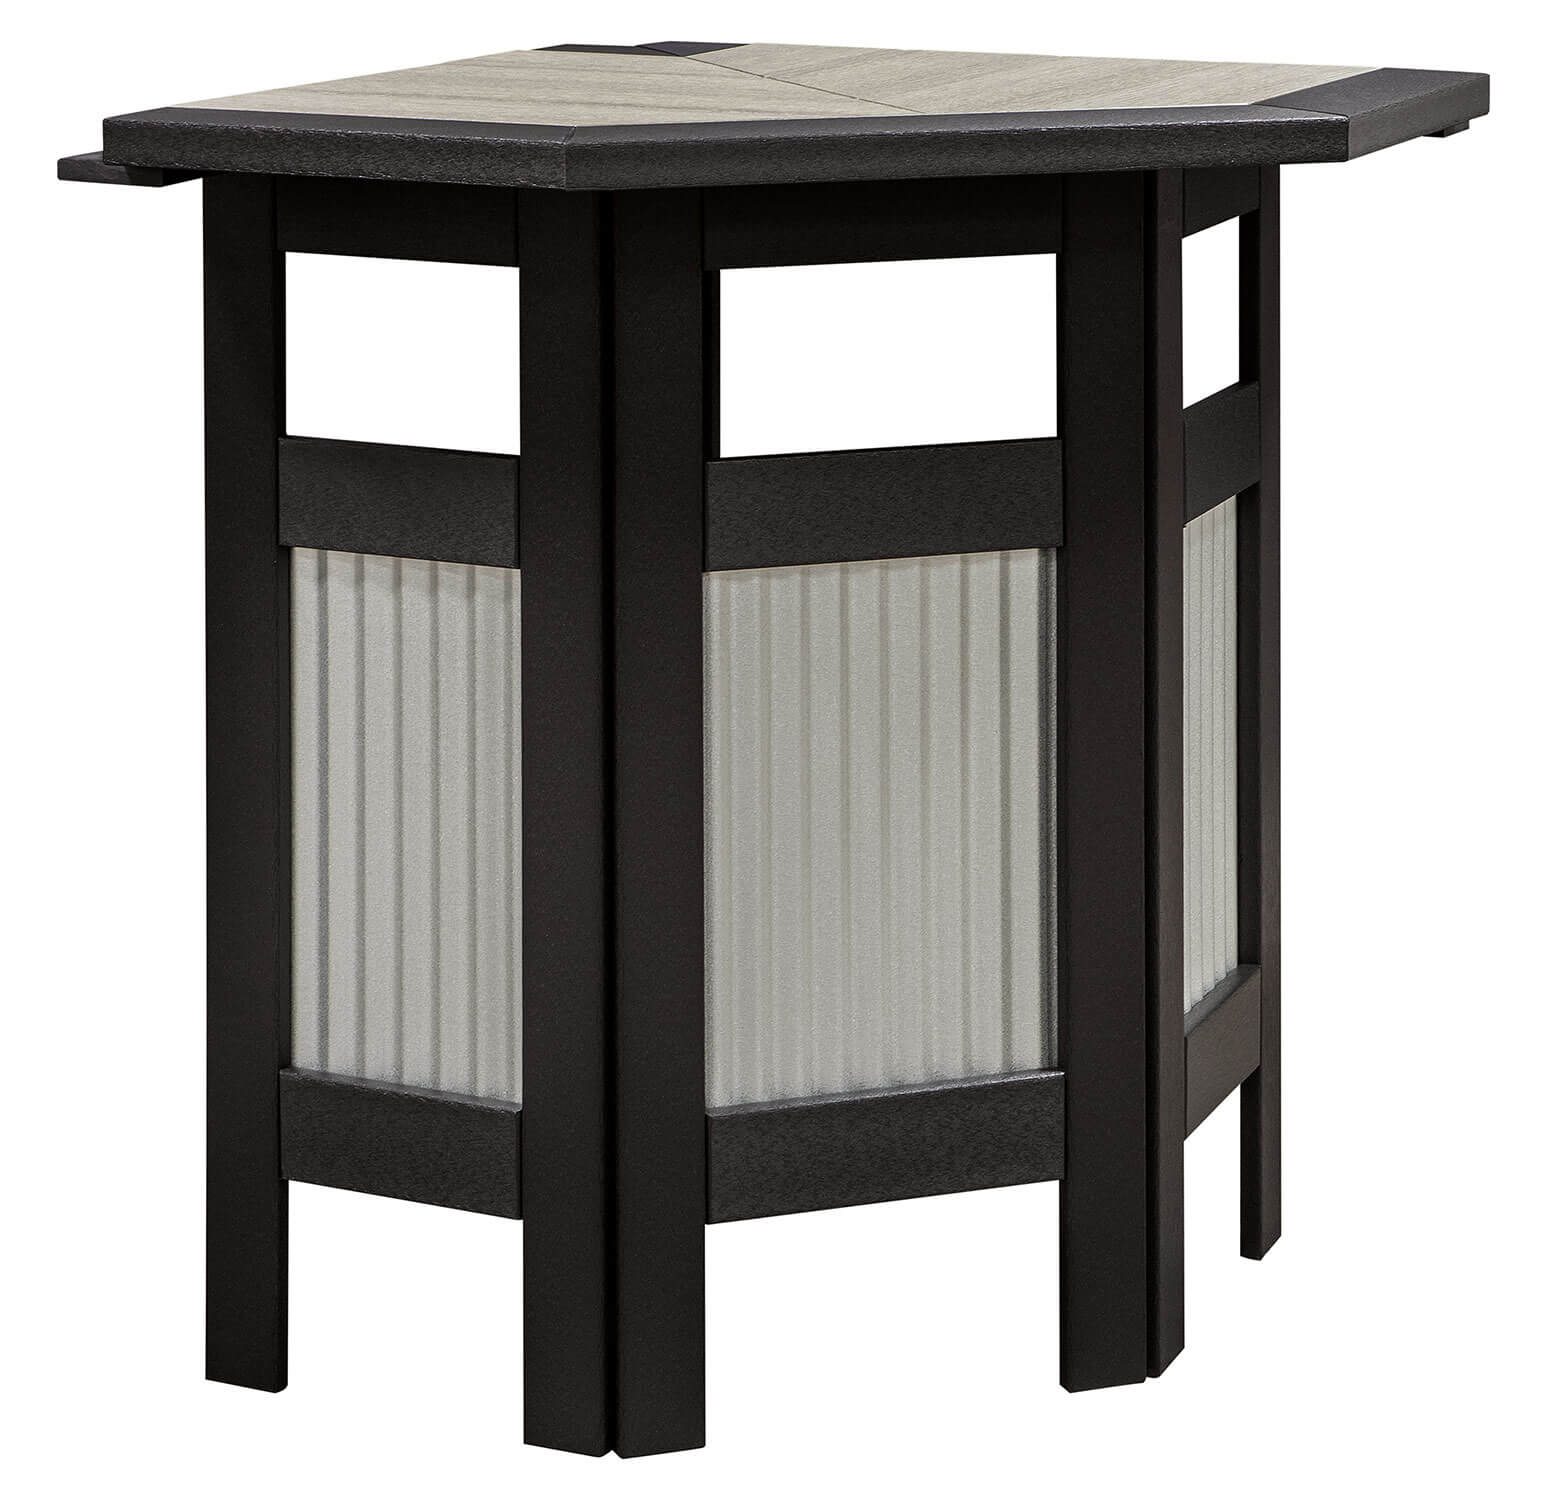 EC Woods Tacoma Outdoor Poly Bar Outside Corner Table Shown in Drift Wood Gray and Black with Metal Fronts